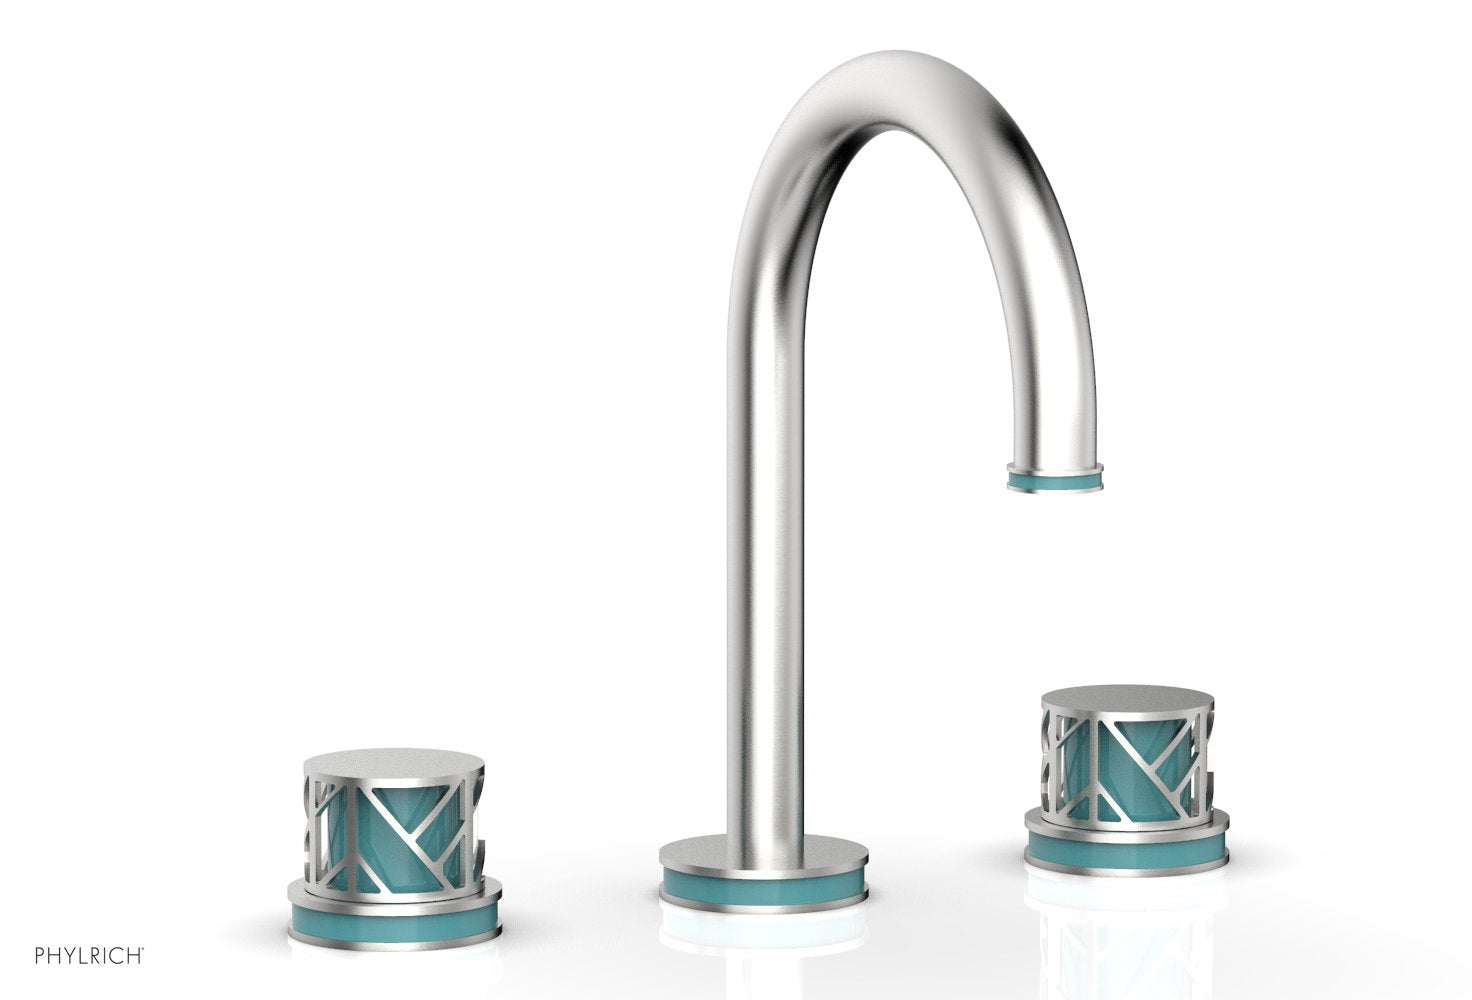 Phylrich JOLIE Widespread Faucet - Round Handles with "Turquoise" Accents